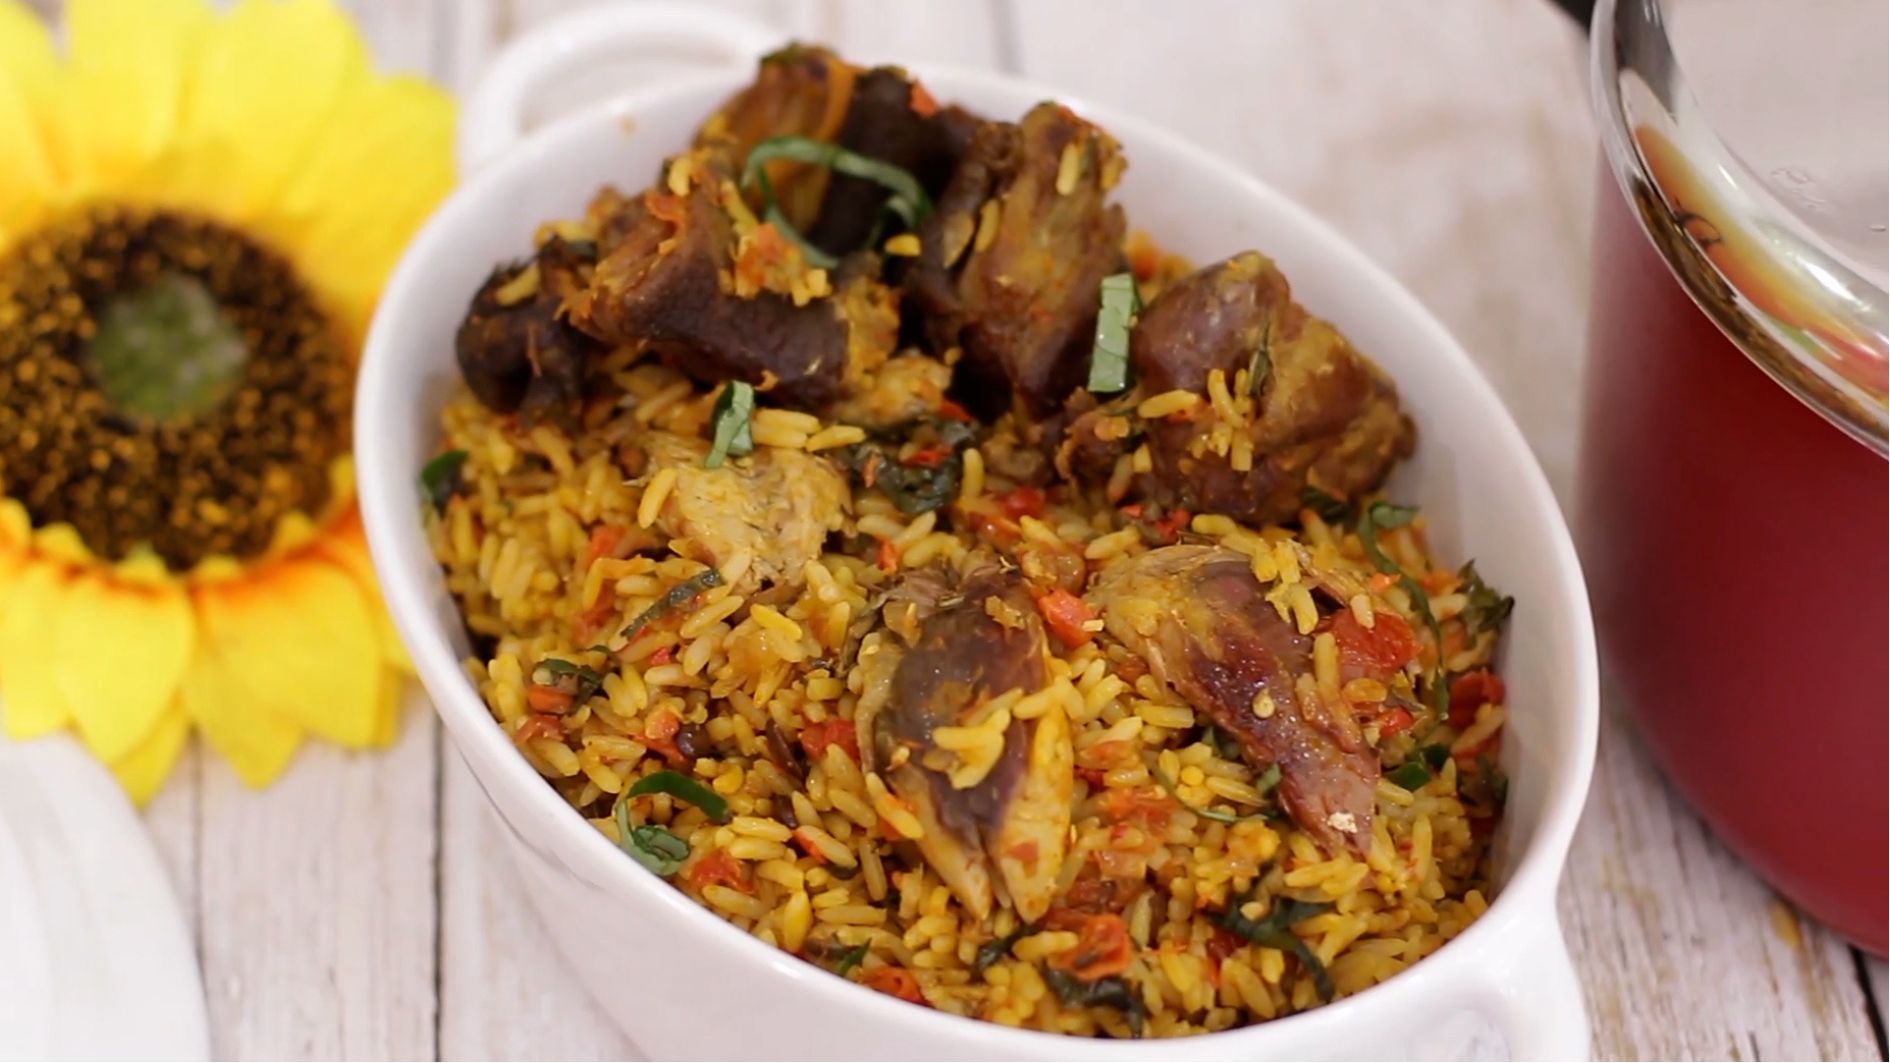 Picture shows ready to eat native jollof rice